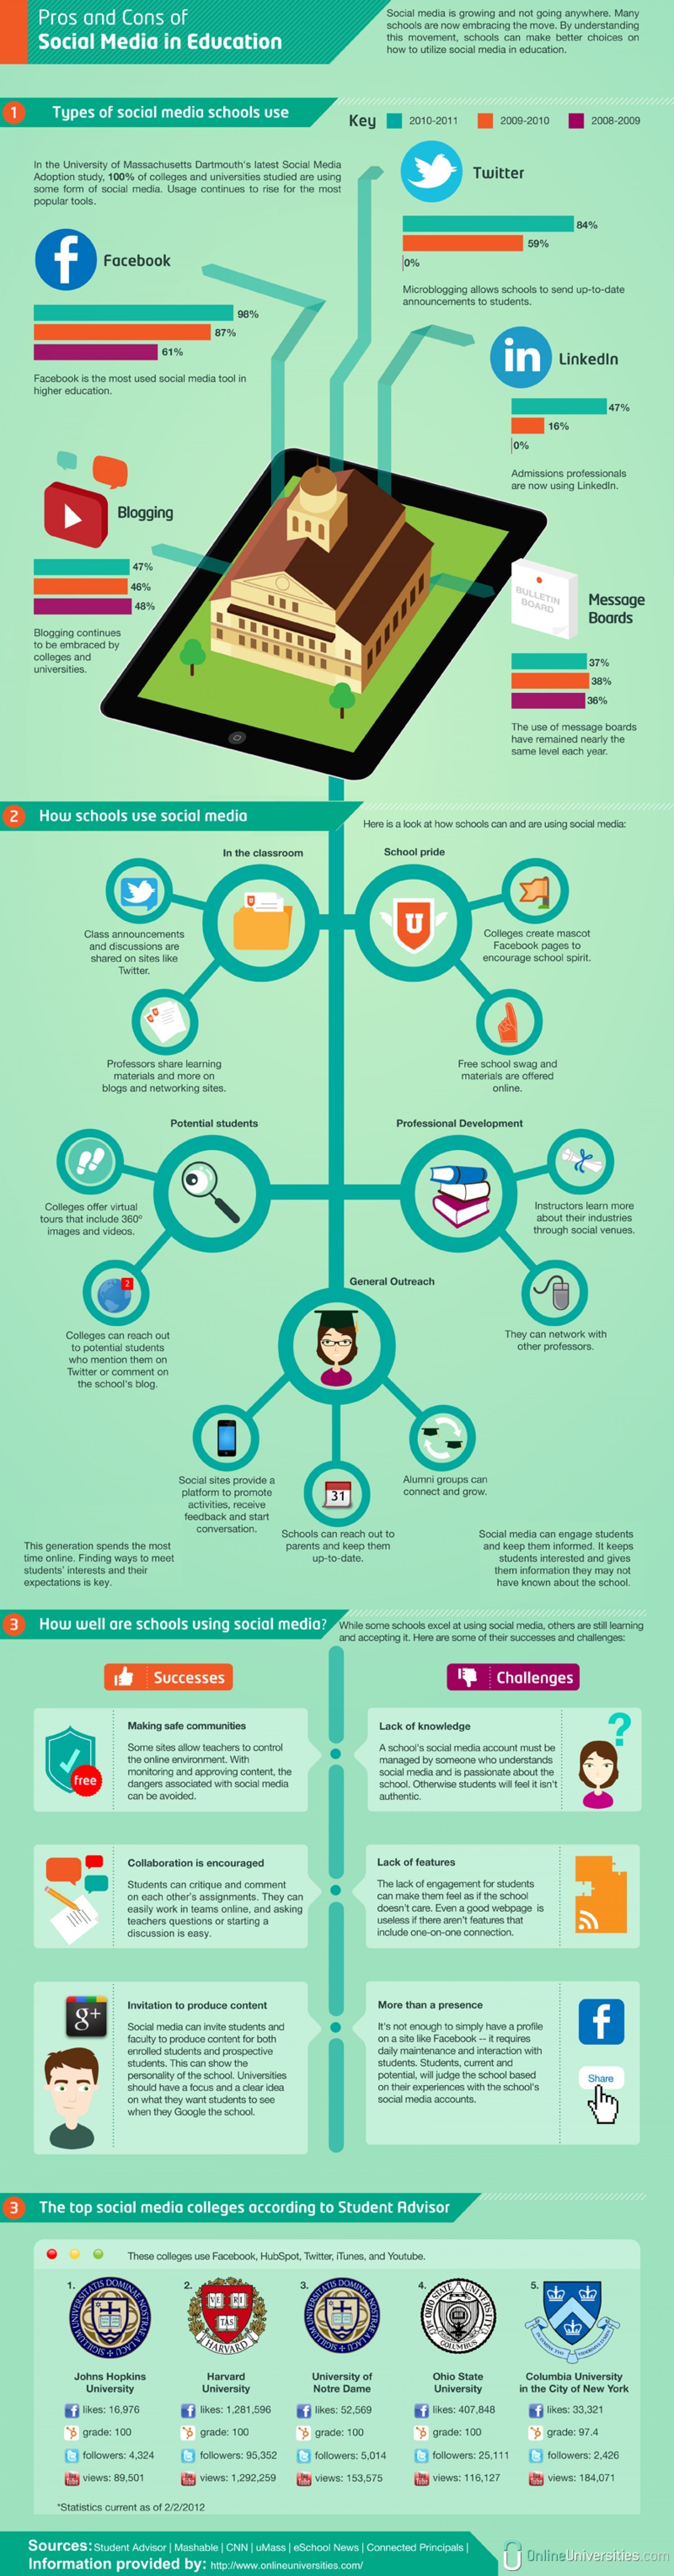 Pros And Cons Of Social Media In Education Infographic